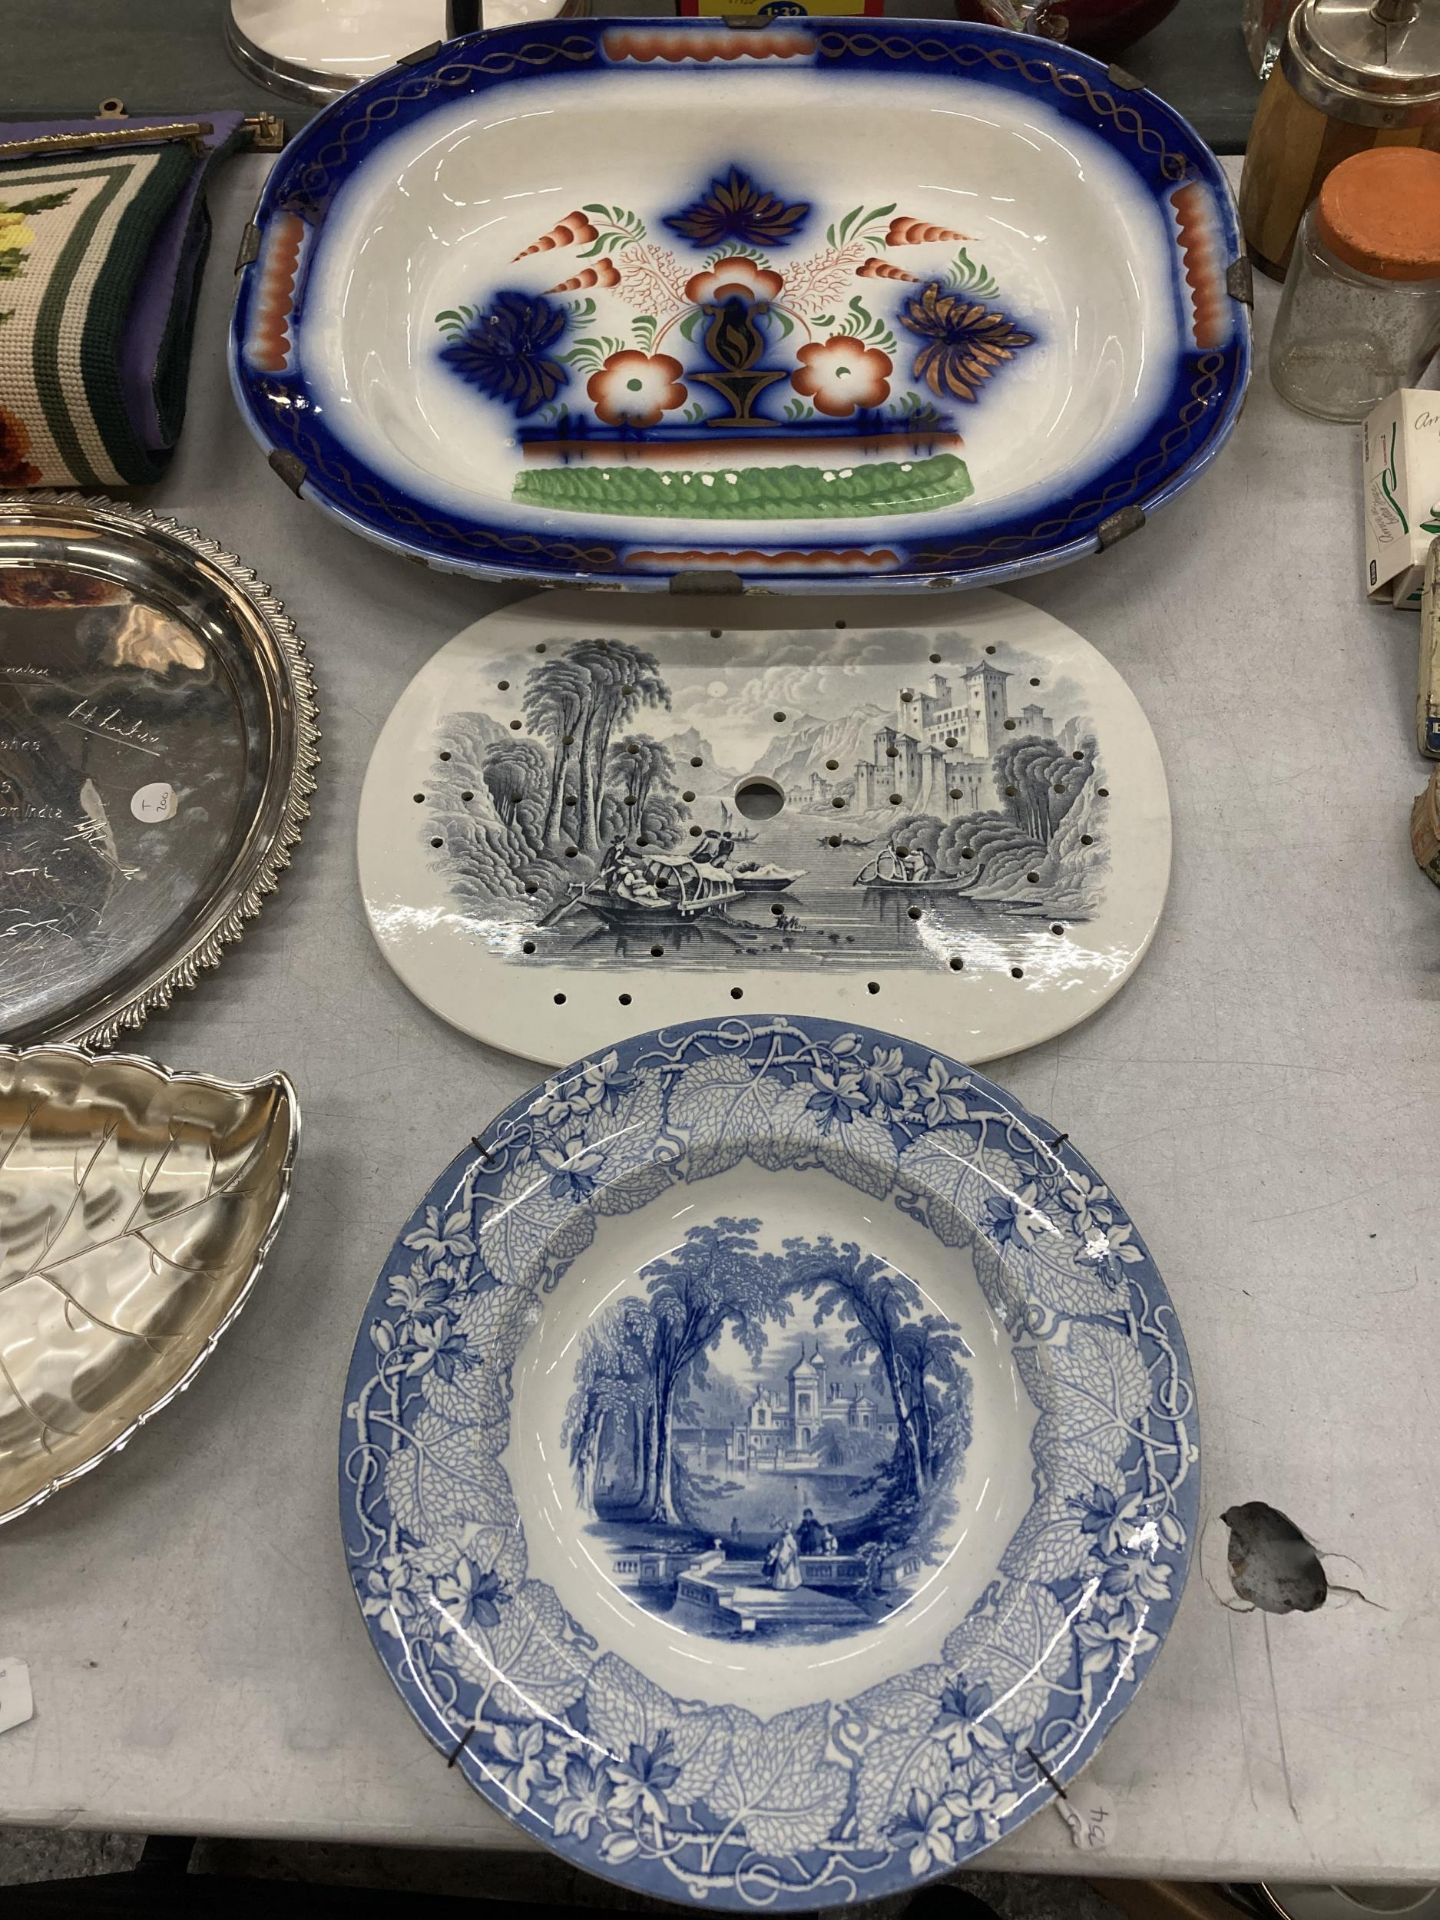 A LARGE VINTAGE CERAMIC PLATTER WITH FLORAL DESIGN, A BLUE AND WHITE BOWL AND A VINTAGE DRAINAGE